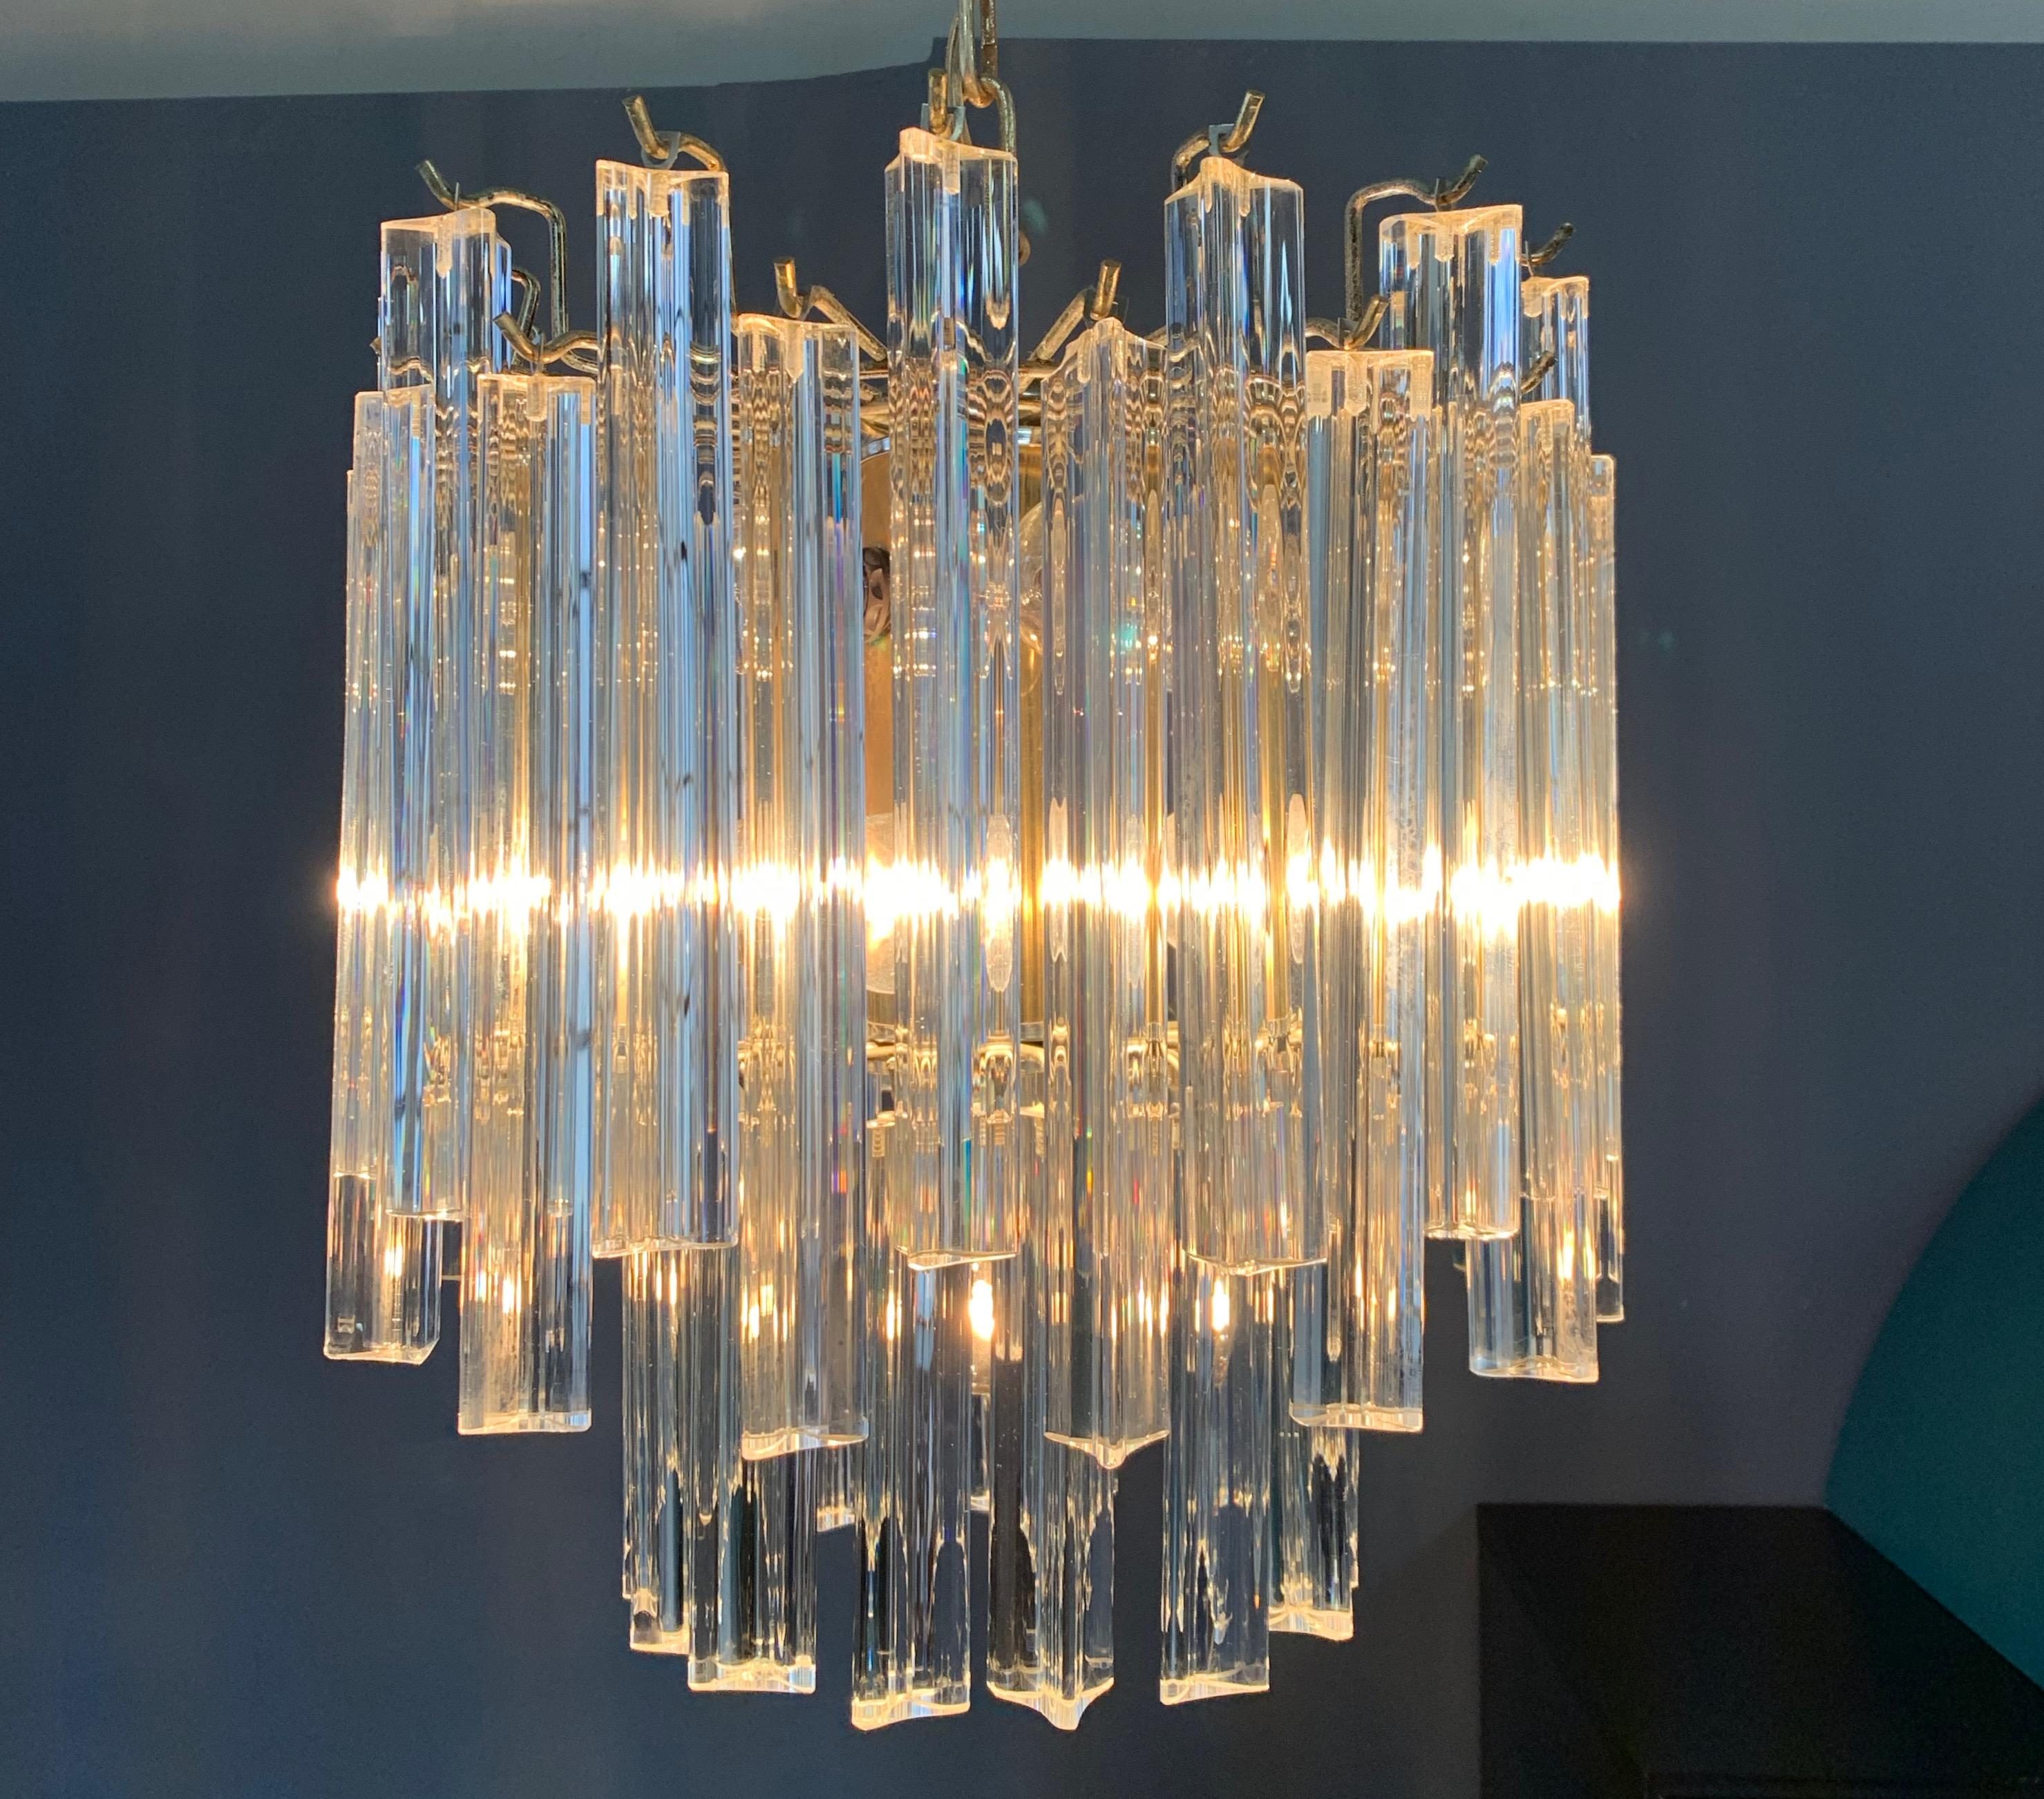 Classic Venini round bi-level chandelier with 9-light bulbs and multi setting lights.